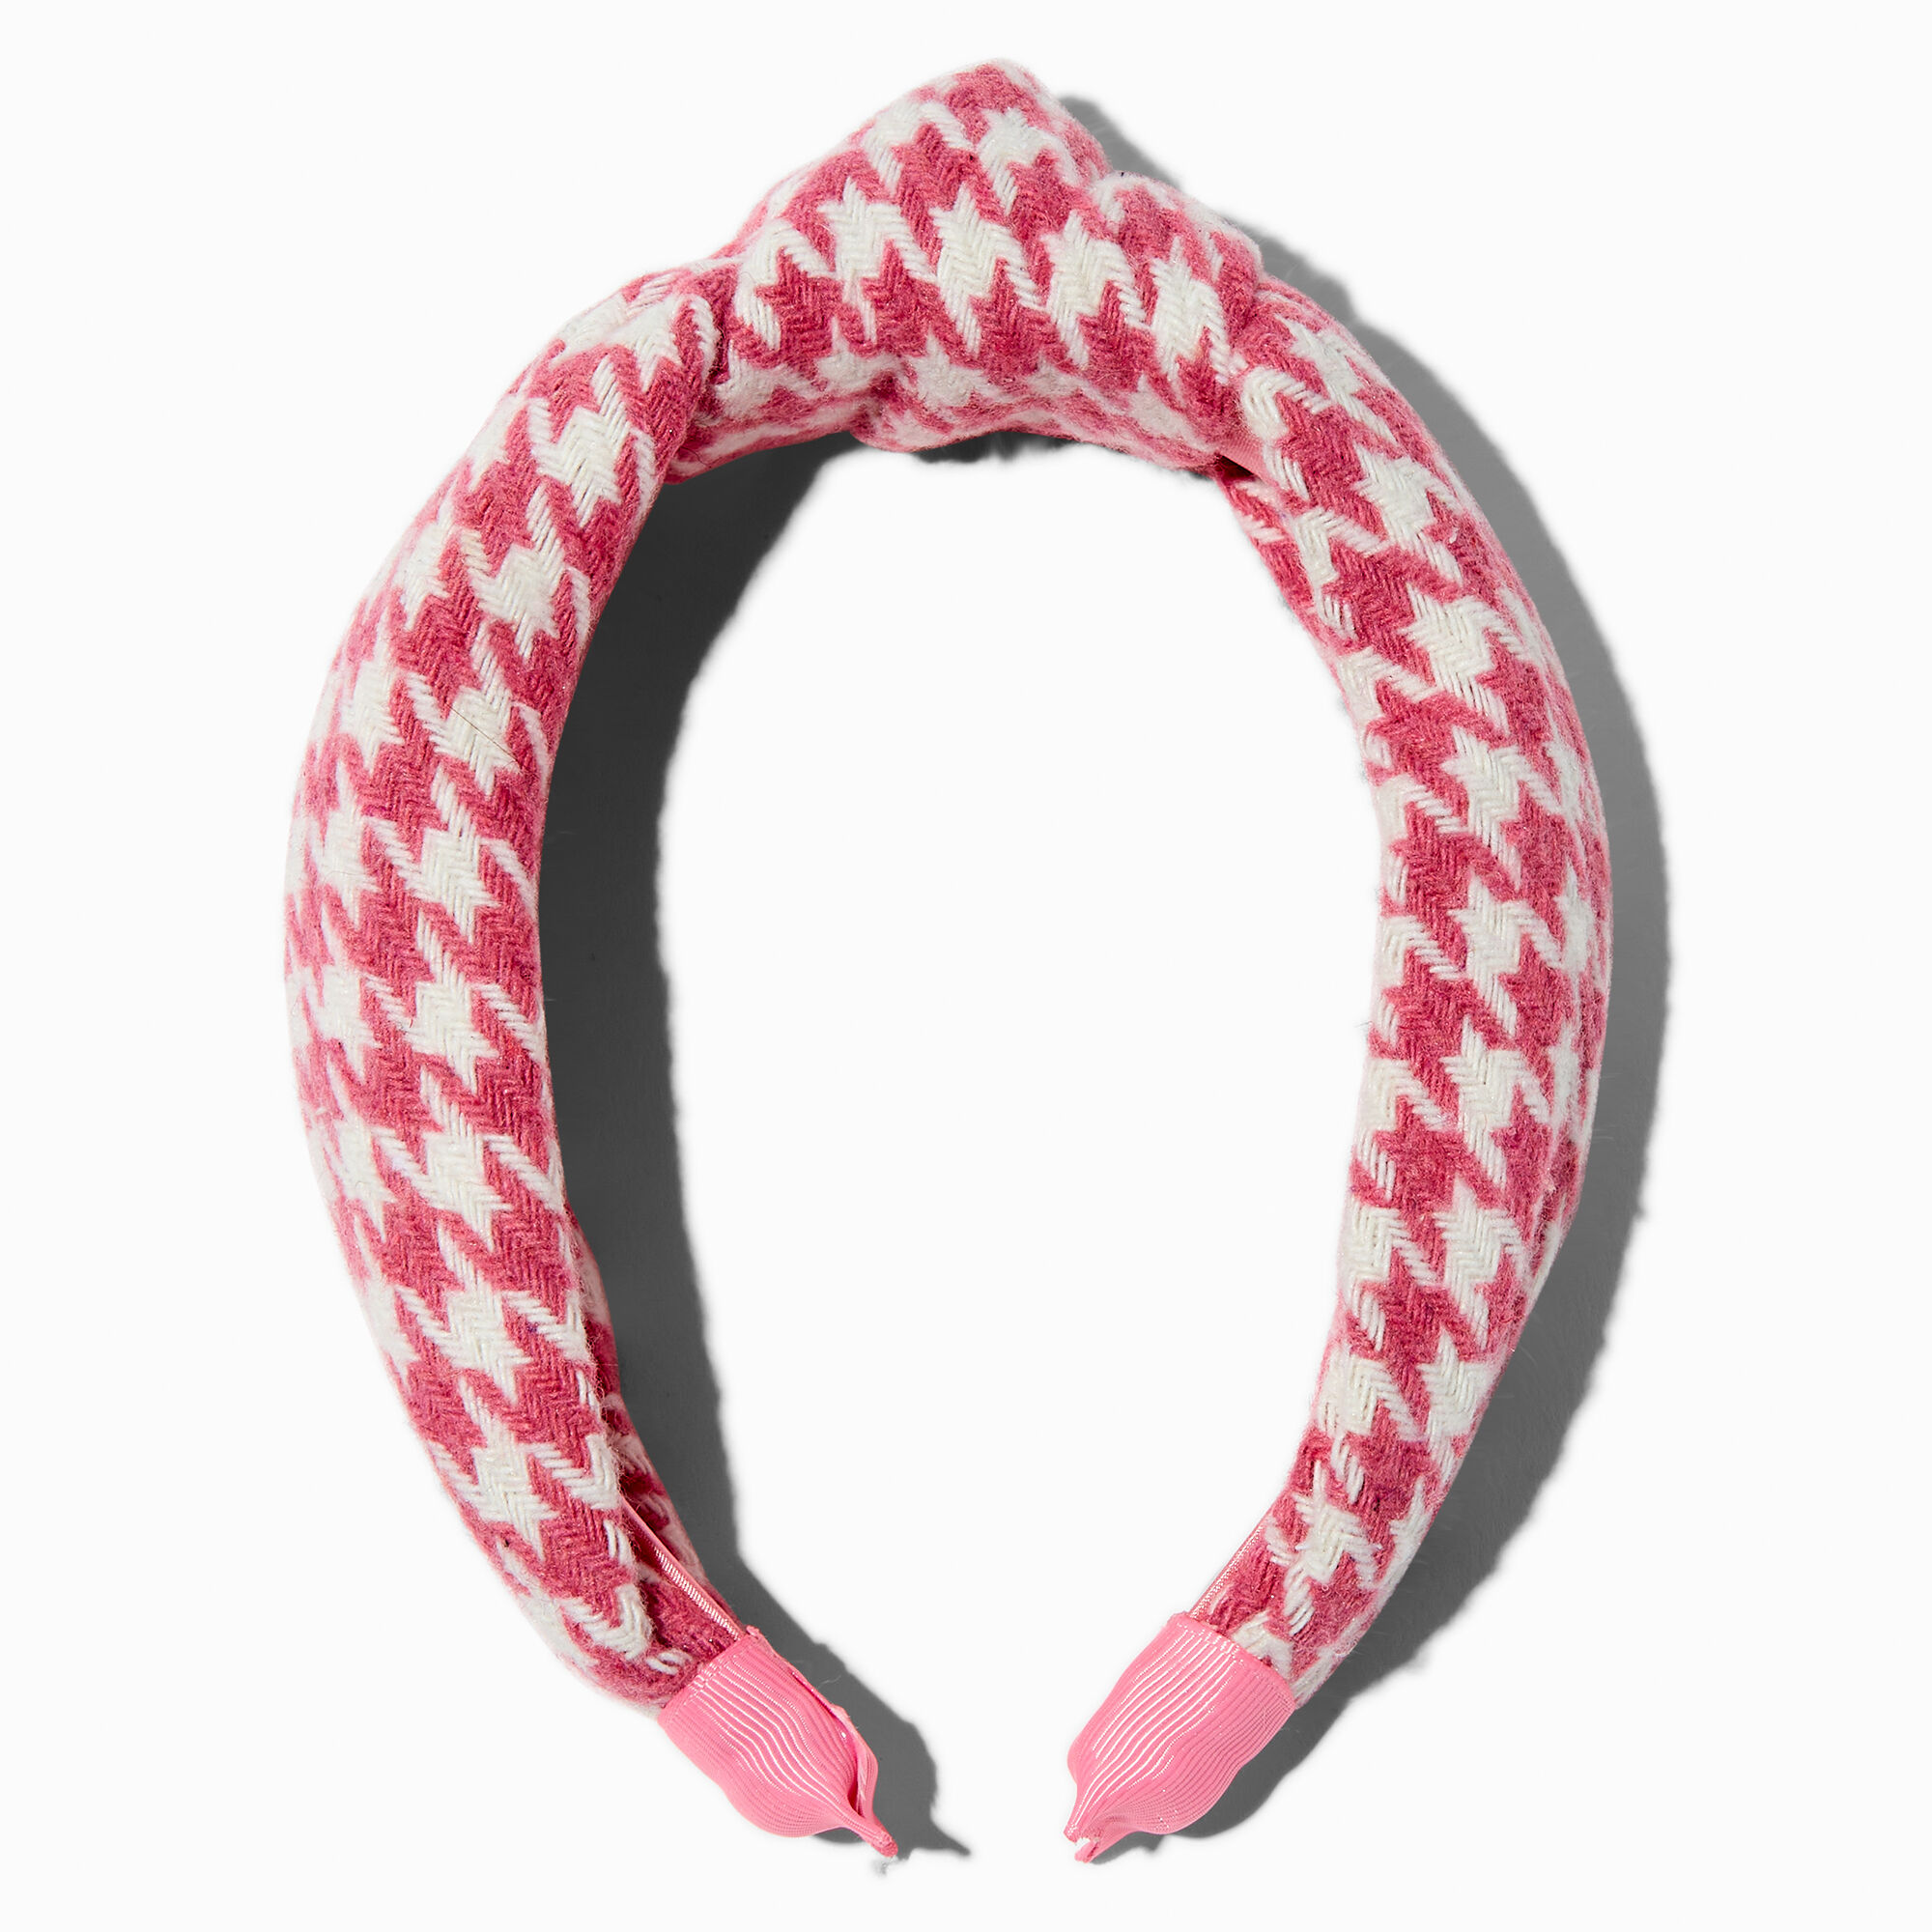 View Mean Girls X Claires Houndstooth Knotted Headband Pink information